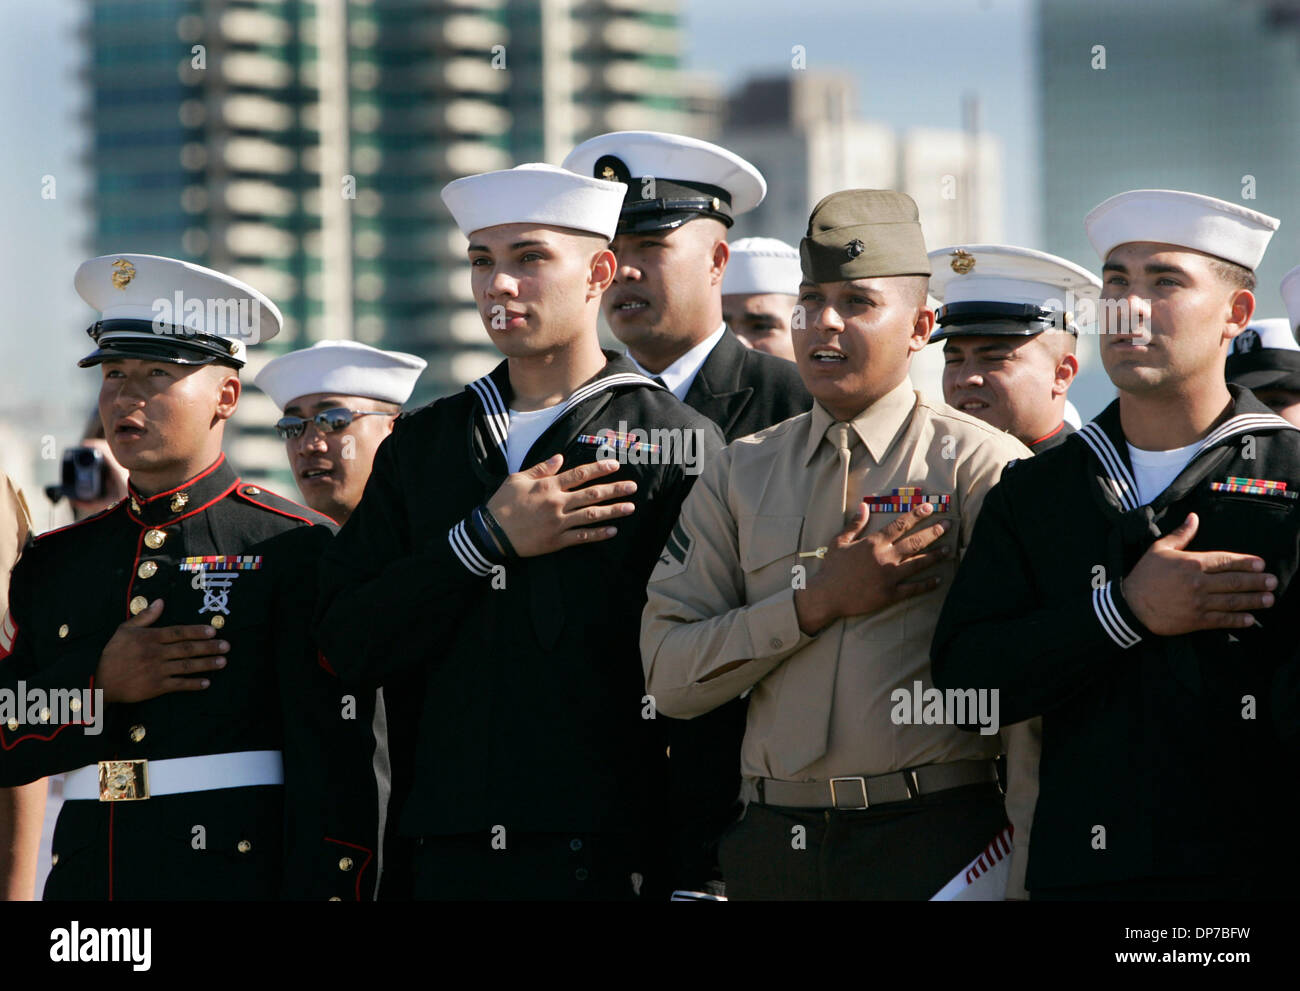 Nov 10, 2006; San Diego, CA, USA; Some of the 78 U. S. military service members from 21 countries that became U.S. Citizens in San Diego today, listen as Rear Admiral Jose Luis Betancourt, Ret. delivers the keynote address during their Naturalization ceremony on the flight deck of the U.S.S. Midway, the San Diego Aircraft Carrier Museum. Betancourt is also a naturalized citizen, ha Stock Photo